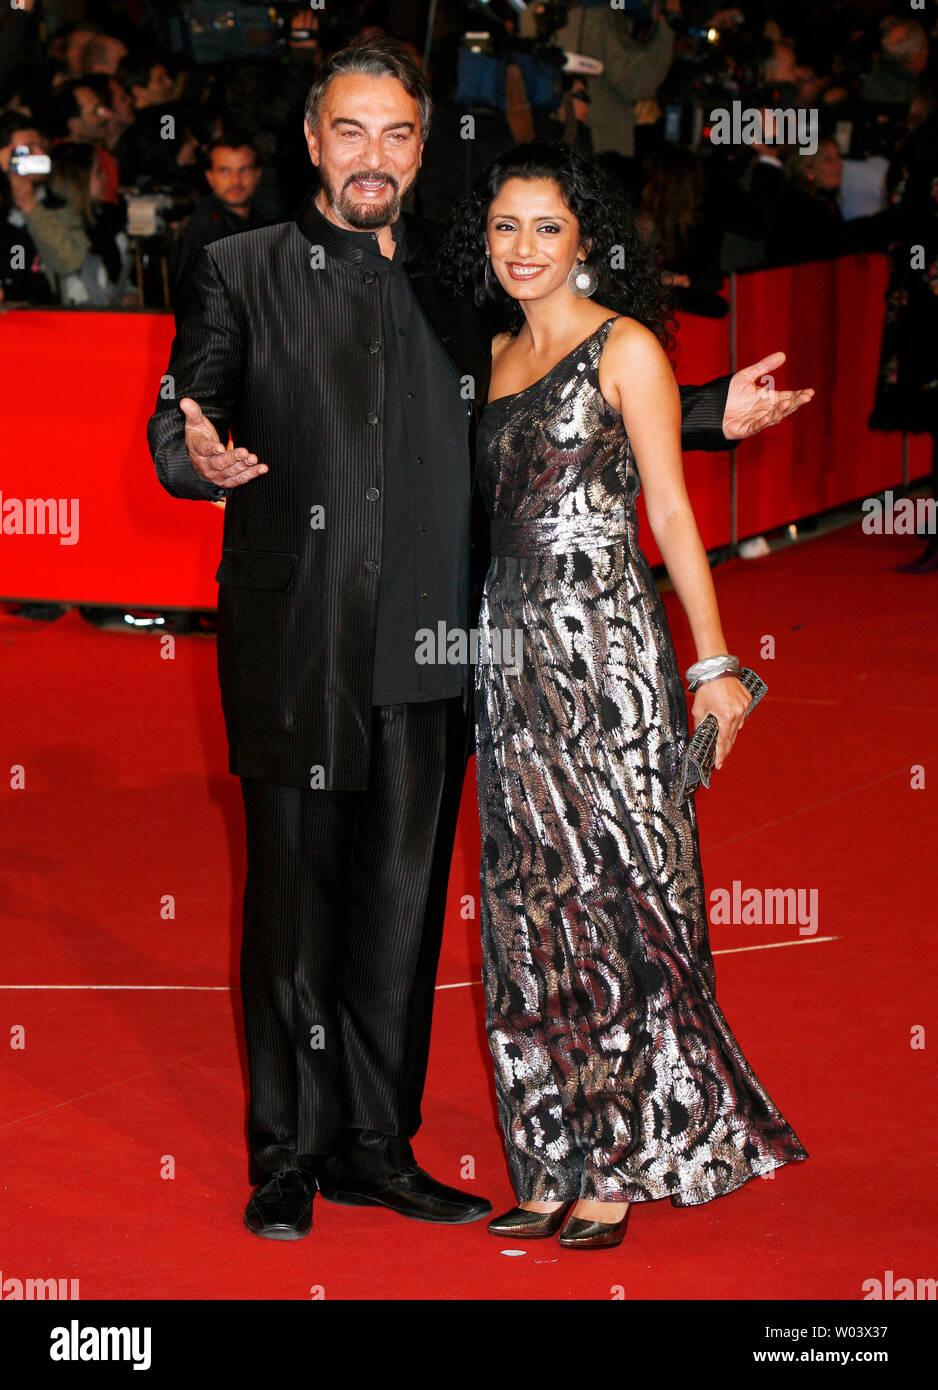 Actor Kabir Bedi and his wife arrive on the red carpet at the Rome Film  Festival in Rome on October 19, 2007. (UPI Photo/David Silpa Stock Photo -  Alamy